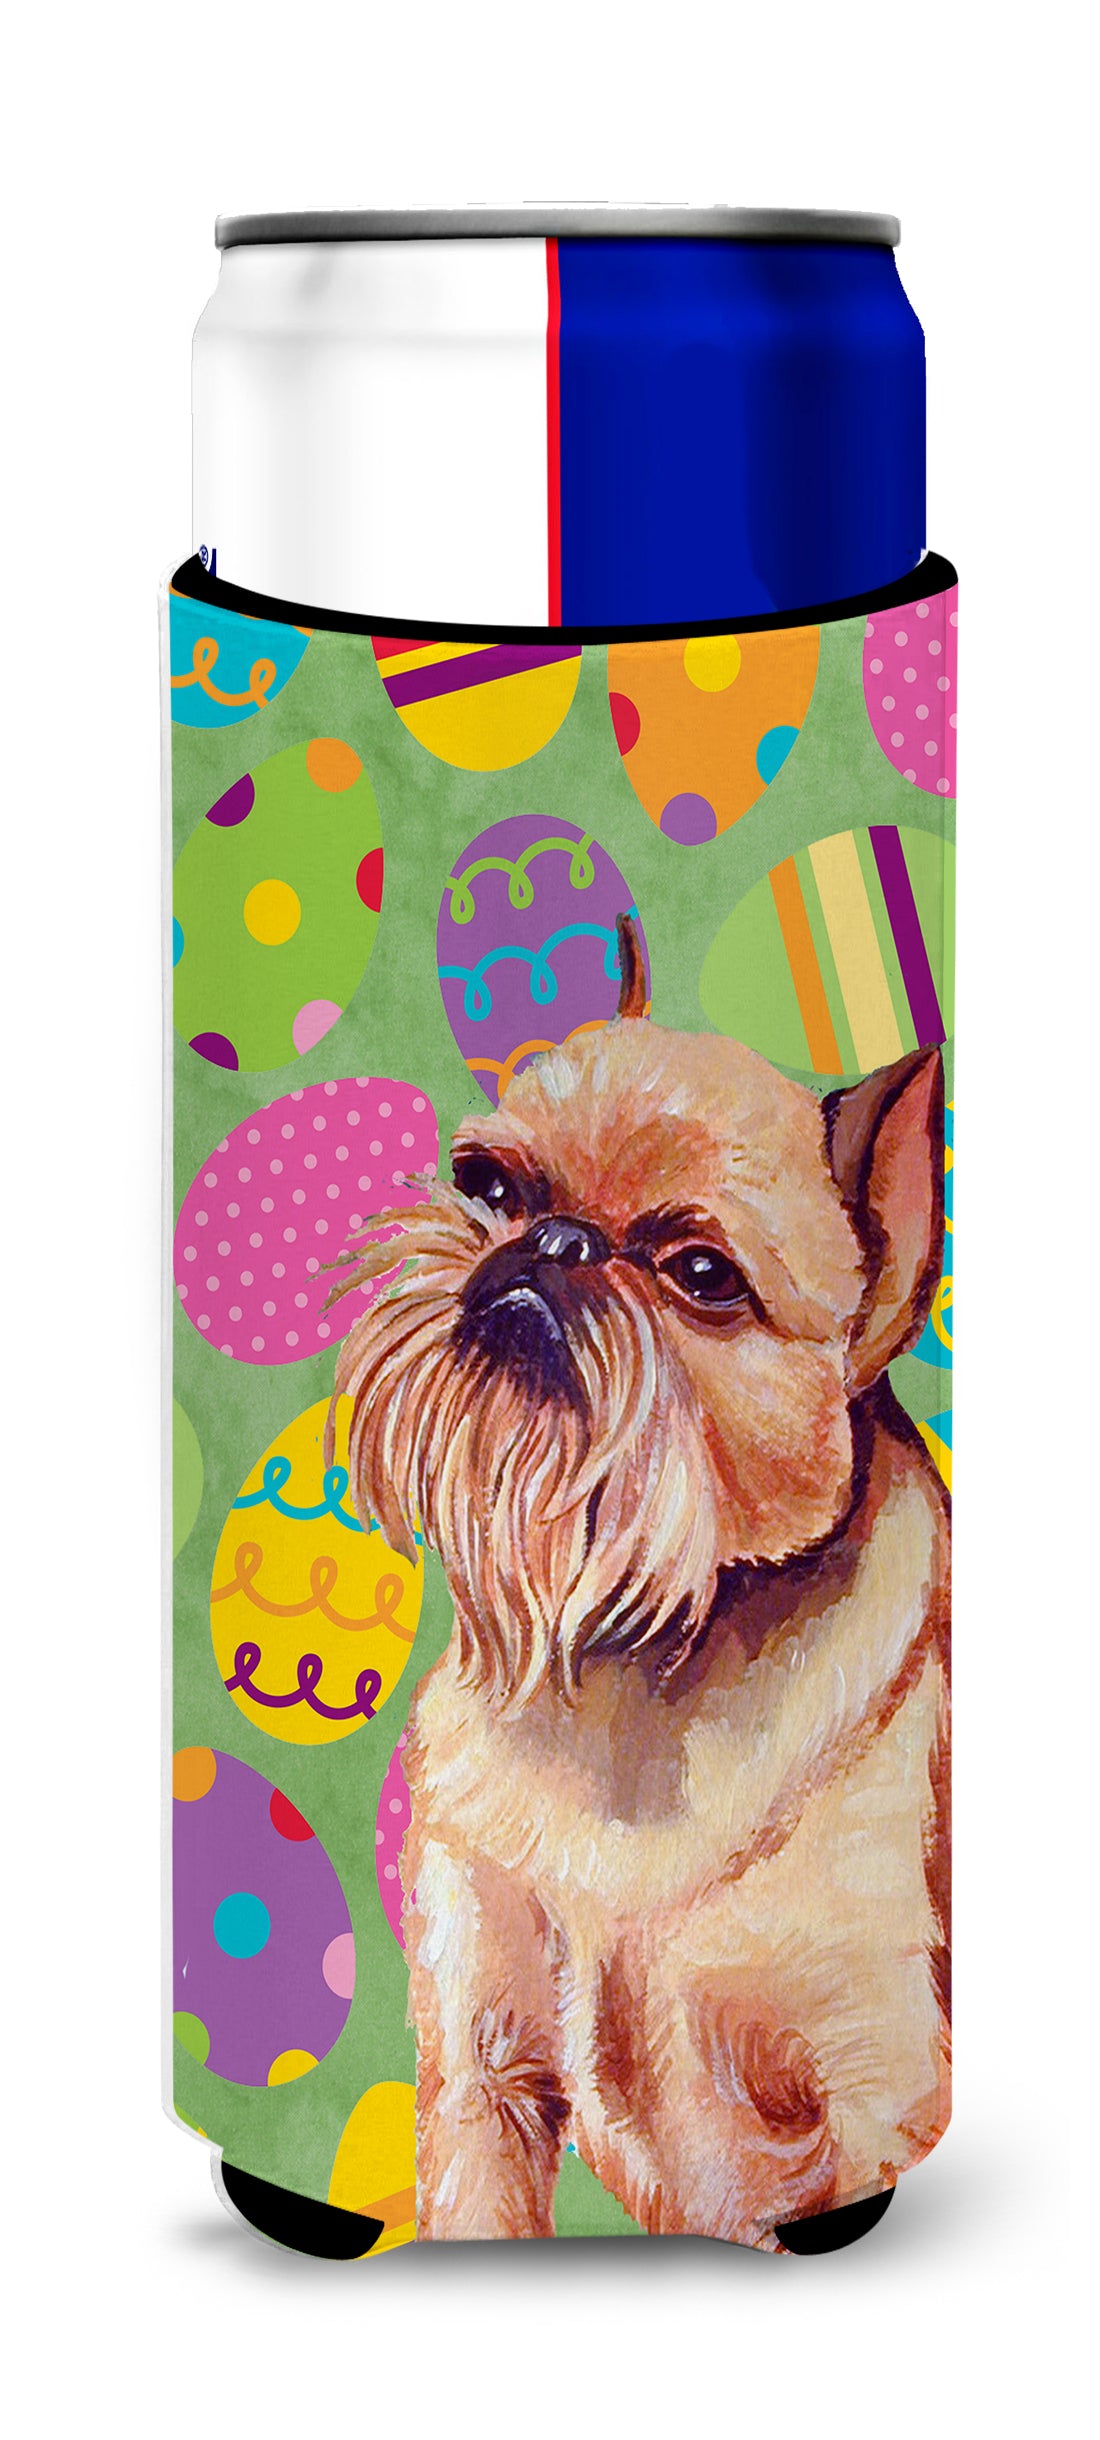 Brussels Griffon Easter Eggtravaganza Ultra Beverage Insulators for slim cans LH9404MUK